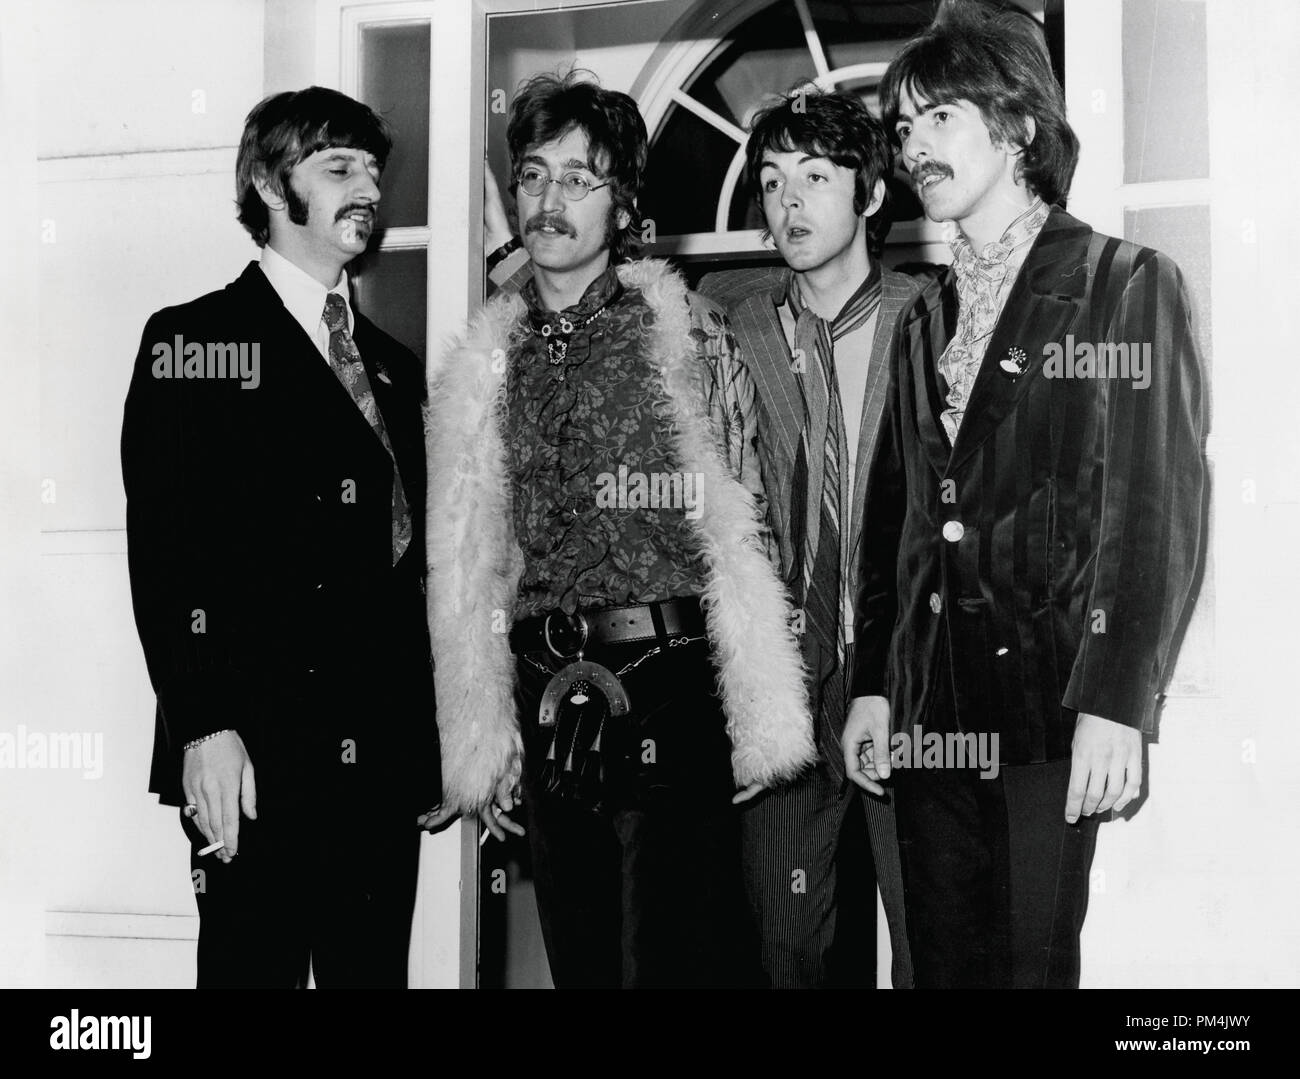 The Beatles, Ringo Starr, John Lennon, Paul McCartney and George Harrison1967. File Reference #1013 075 THA © JRC /The Hollywood Archive - All Rights Reserved. Stock Photo